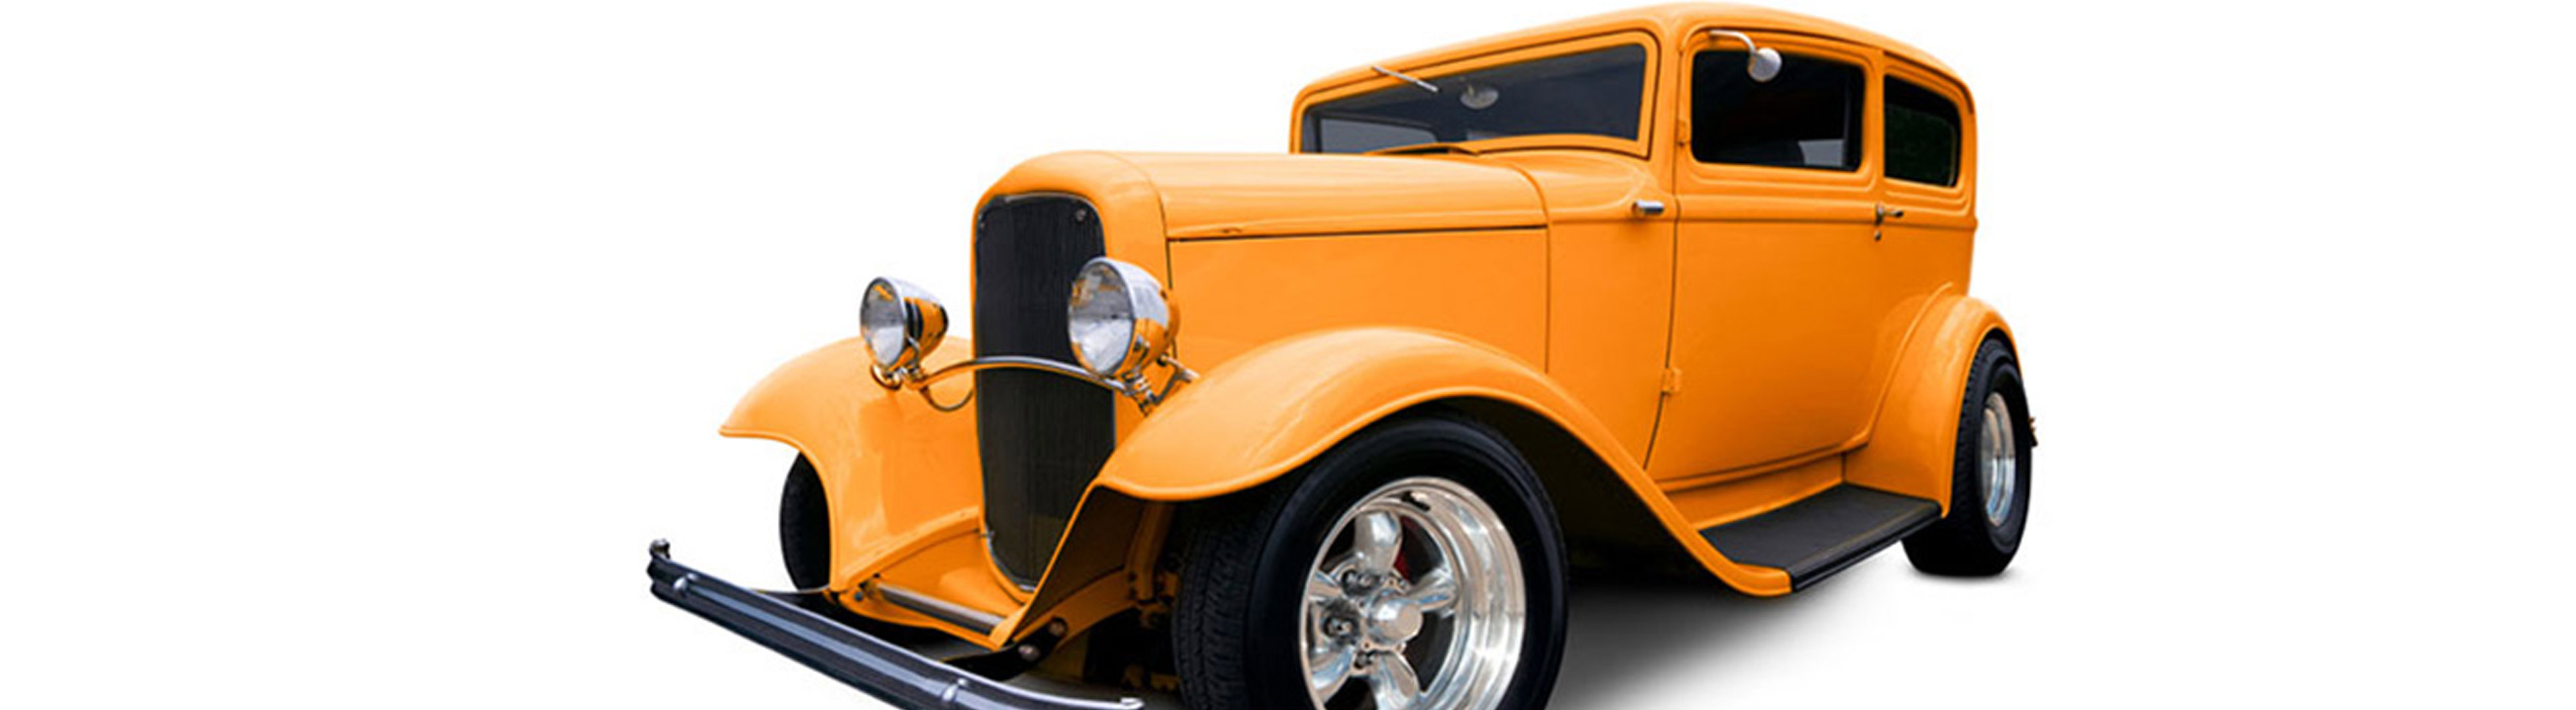 New Jersey Classic Car Insurance coverage